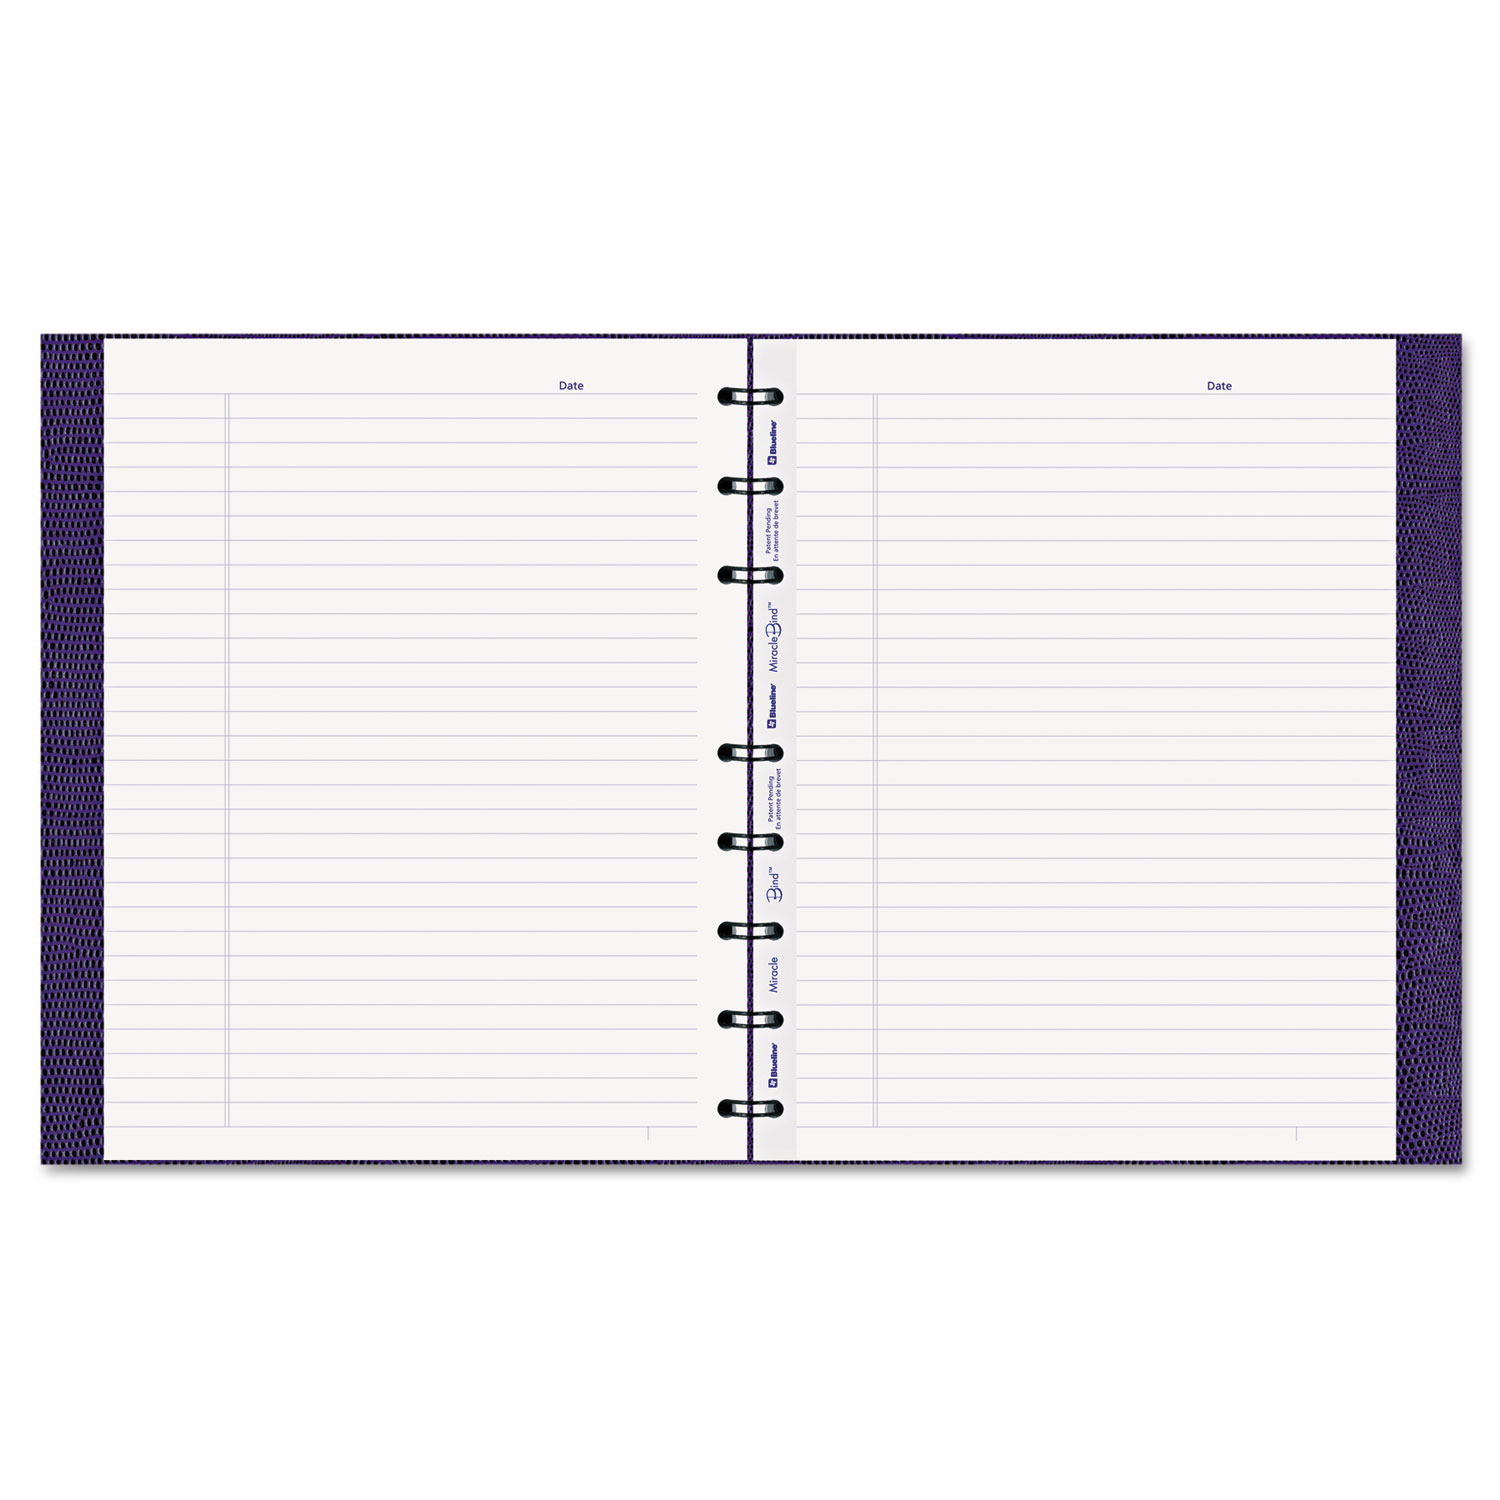 MiracleBind Notebook, 1 Subject, Medium/College Rule, Purple Cover, 9.25 x 7.25, 75 Pages